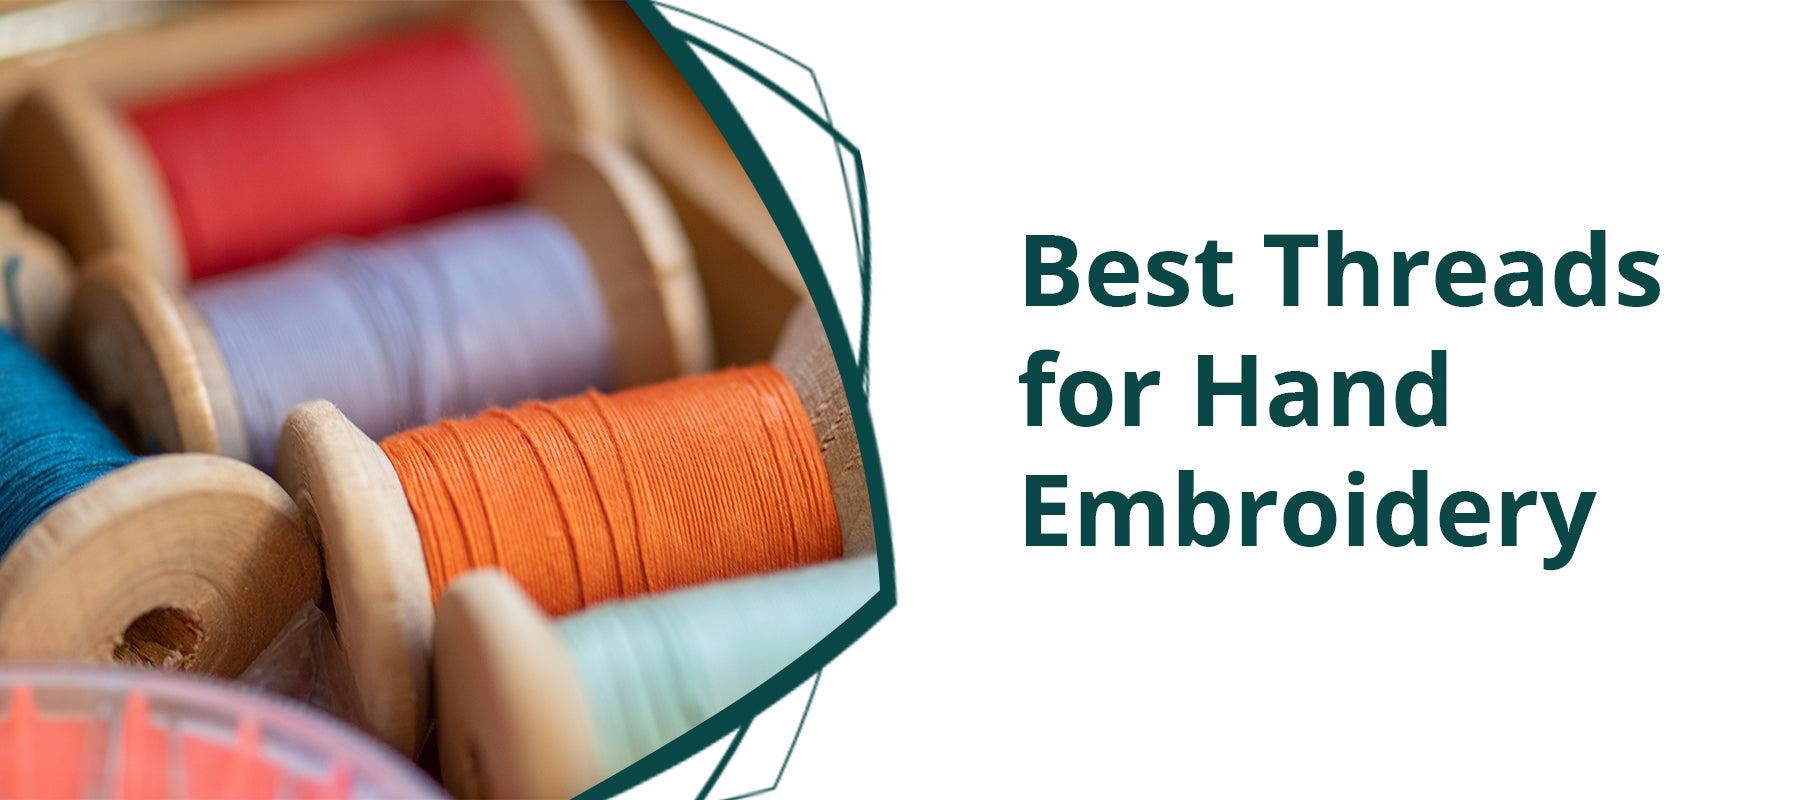 Best Threads for Hand Embroidery: A Guide for Beginners